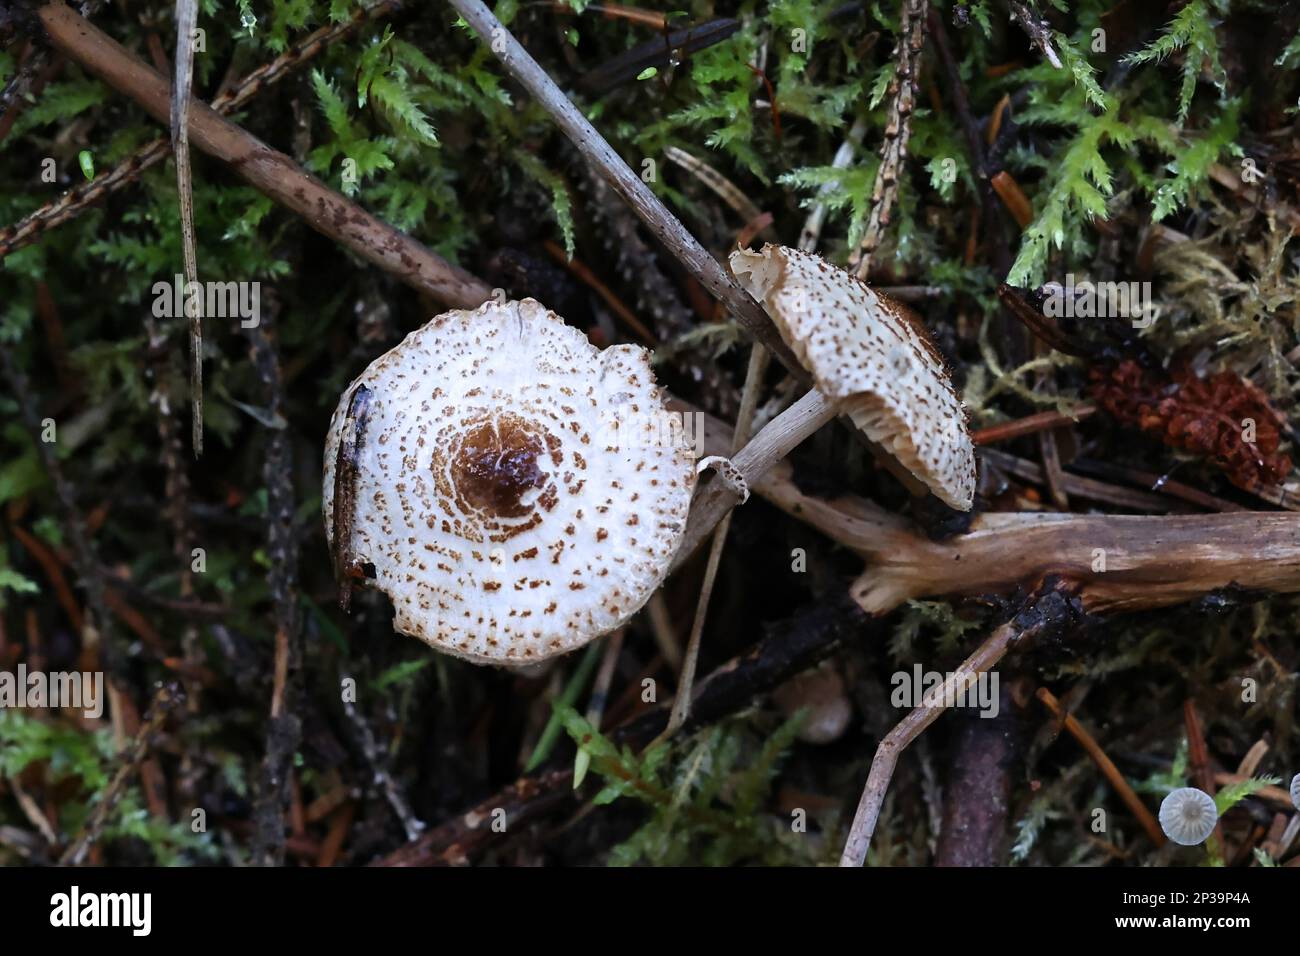 Lepiota felina, commonly known as Cat Dapperling, wild fungus from Finland Stock Photo